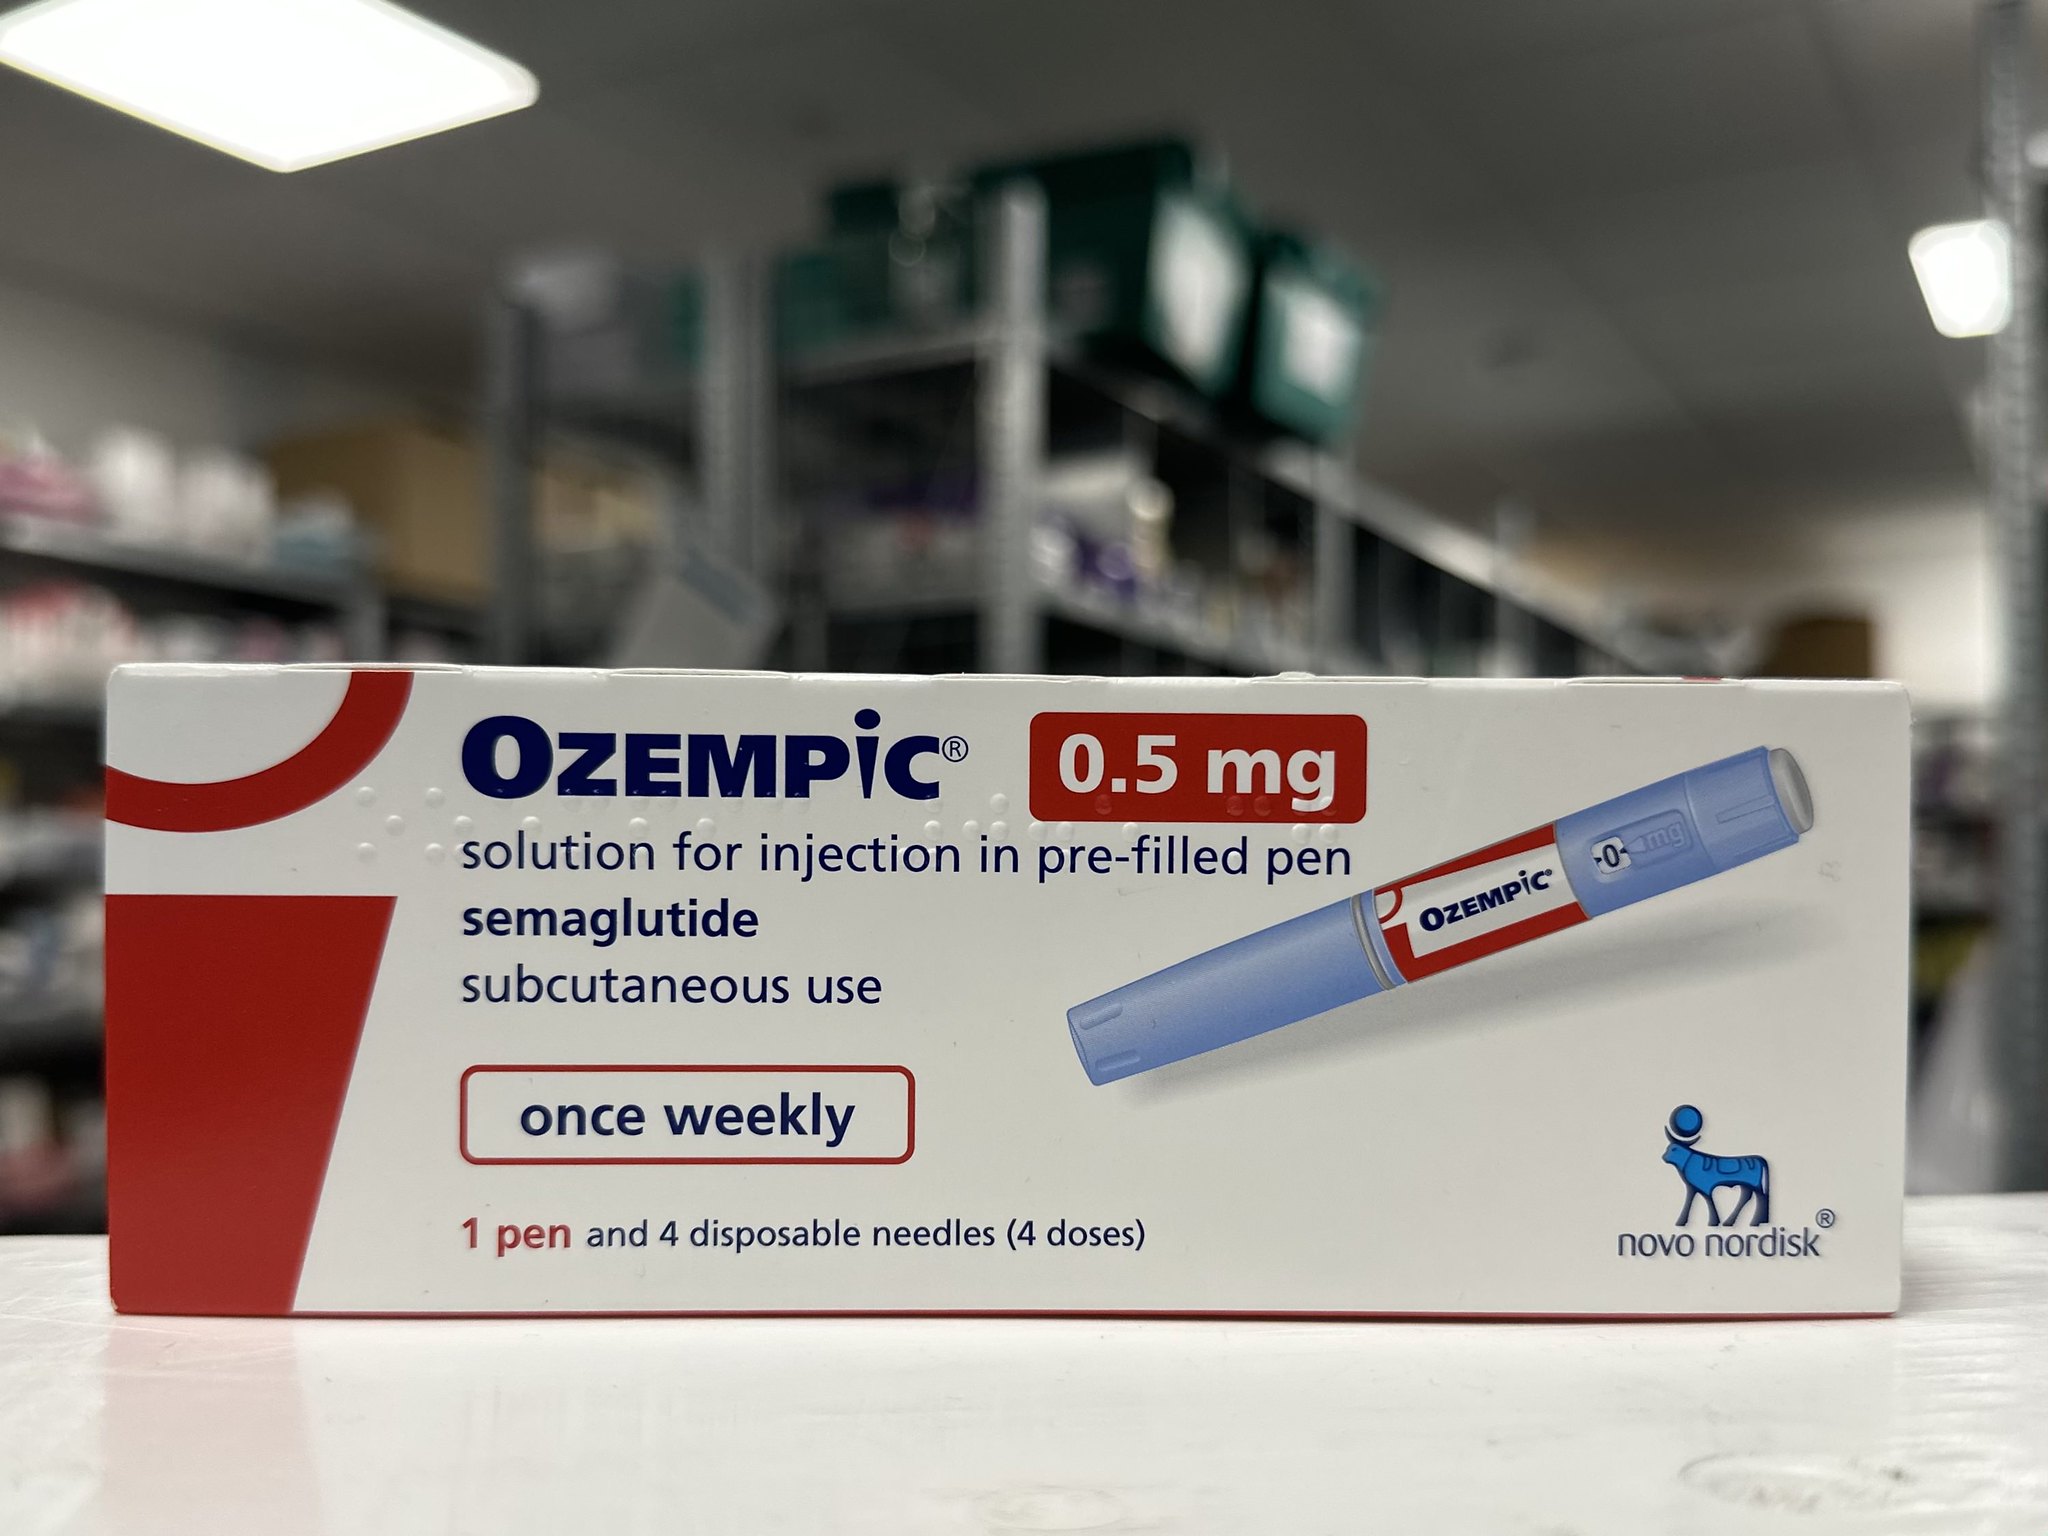 Ozempic could face Medicare drug price negotiations next